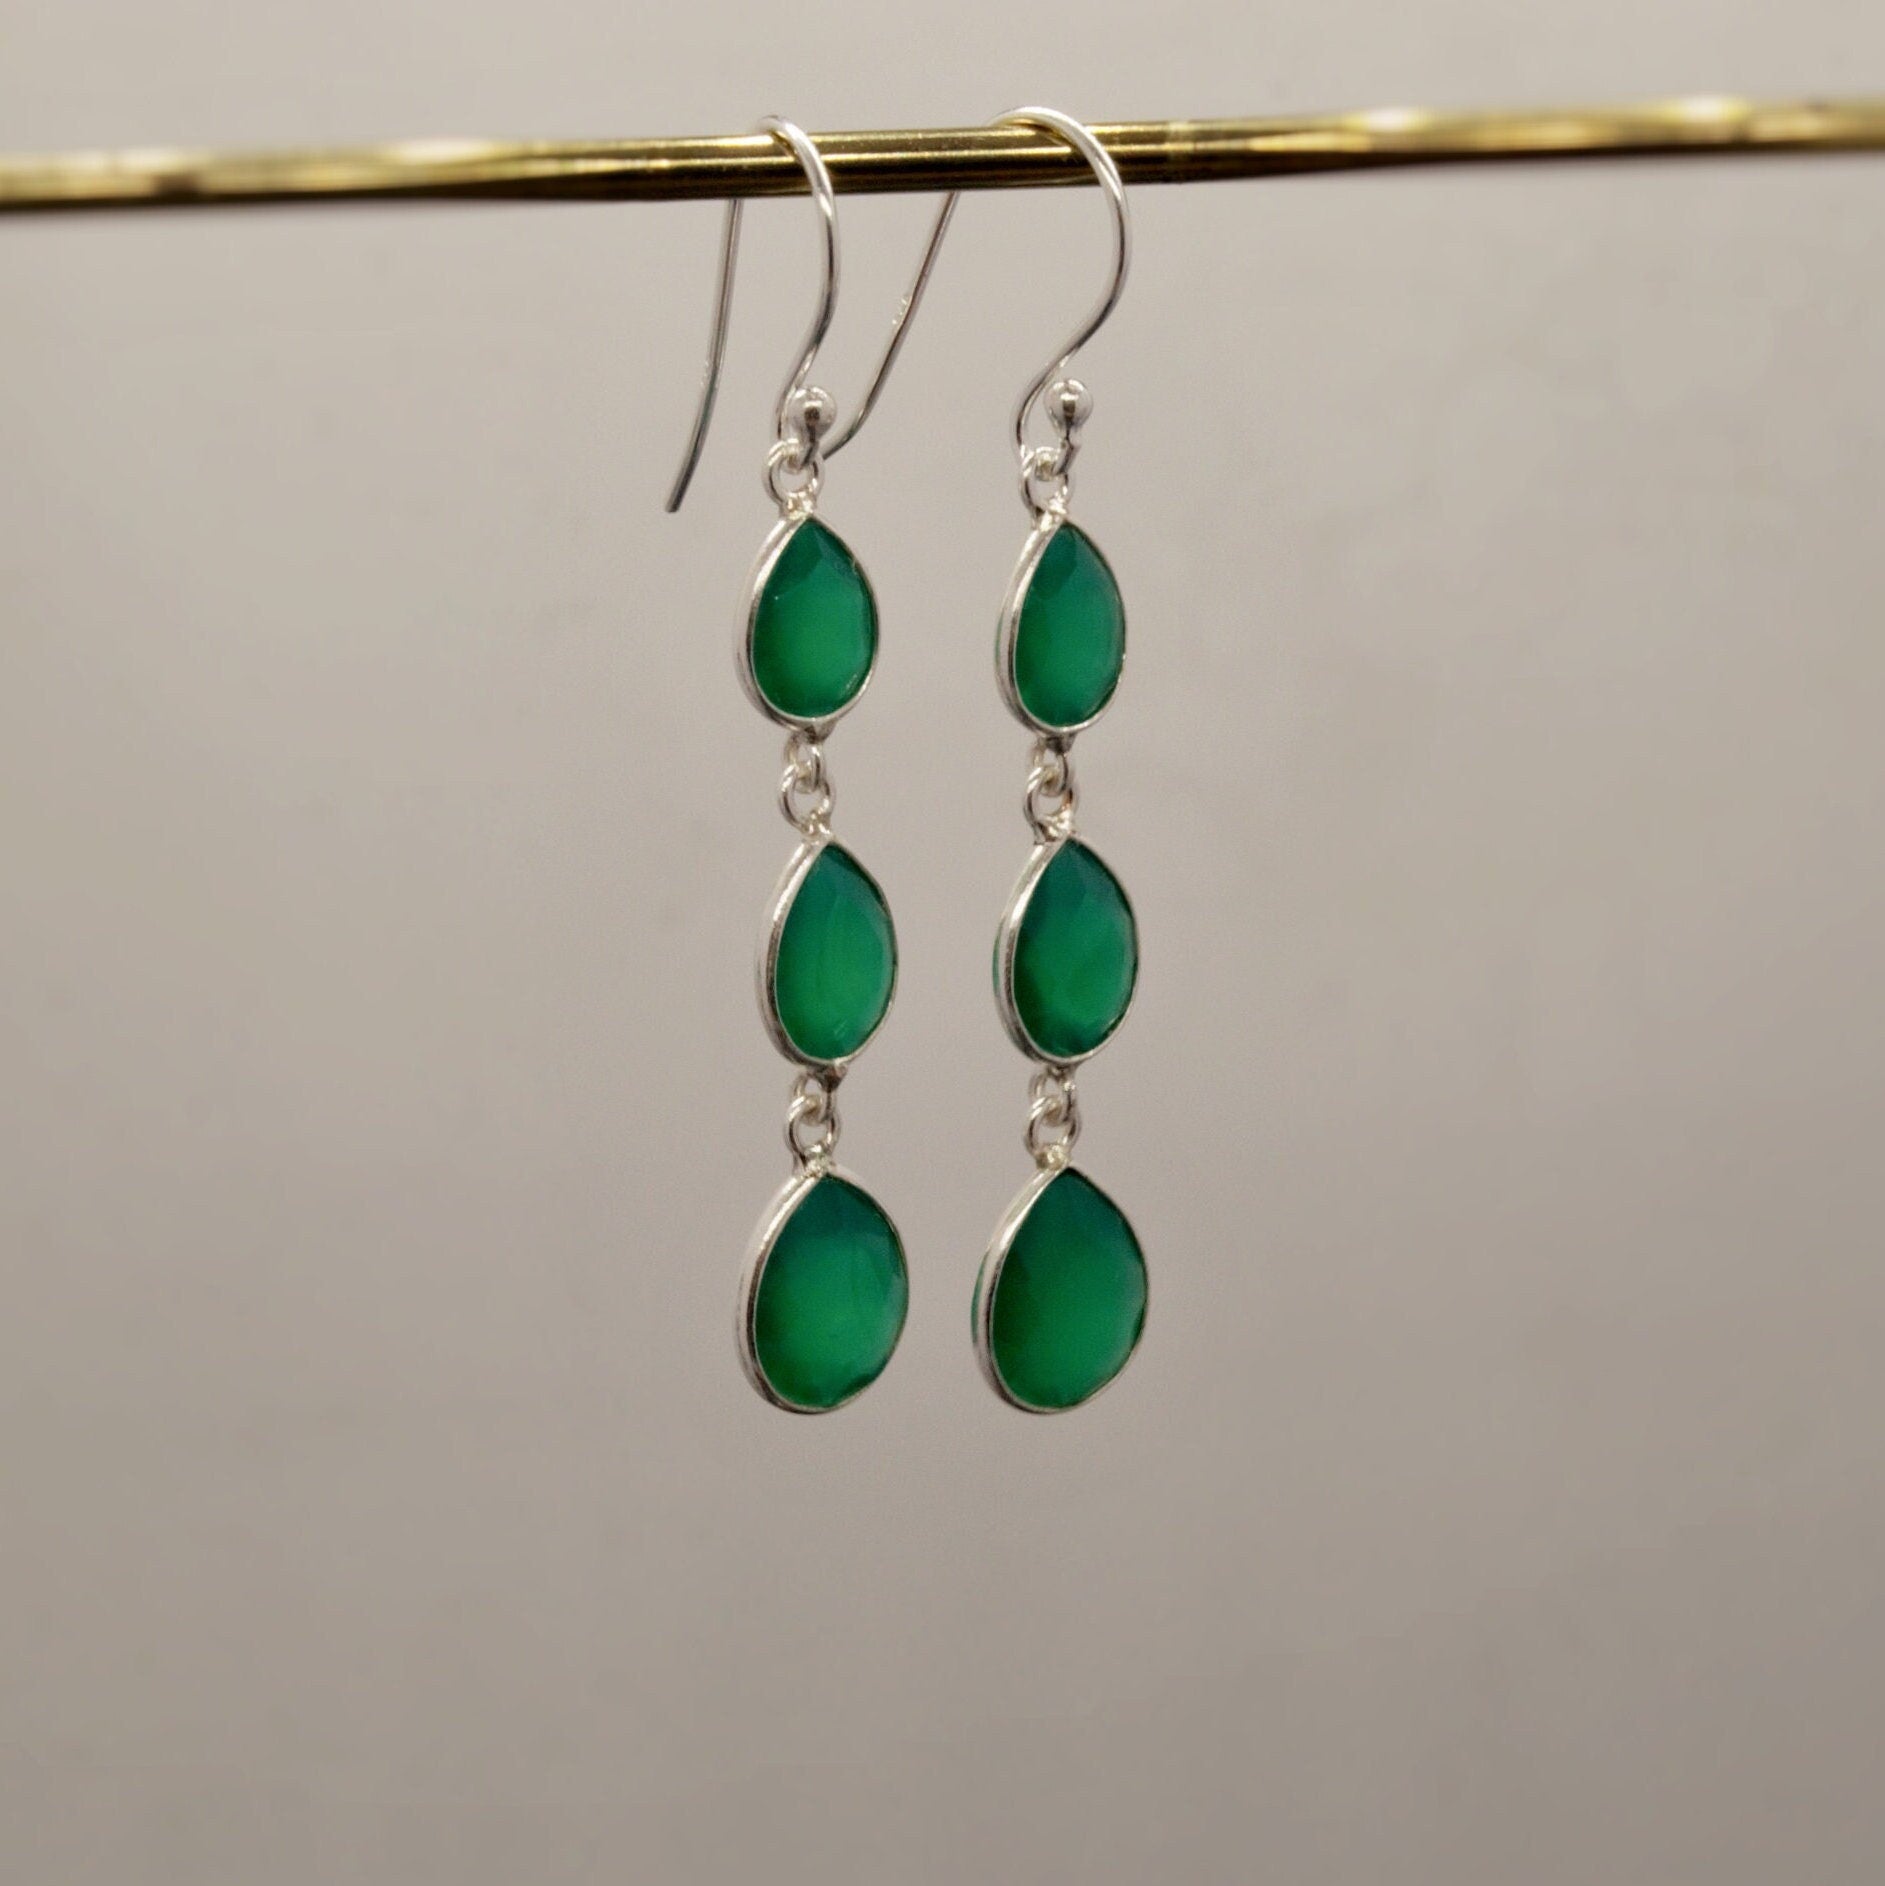 Lief Green Beryl Earrings in Yellow Gold with Freshwater Pearls | Winterson